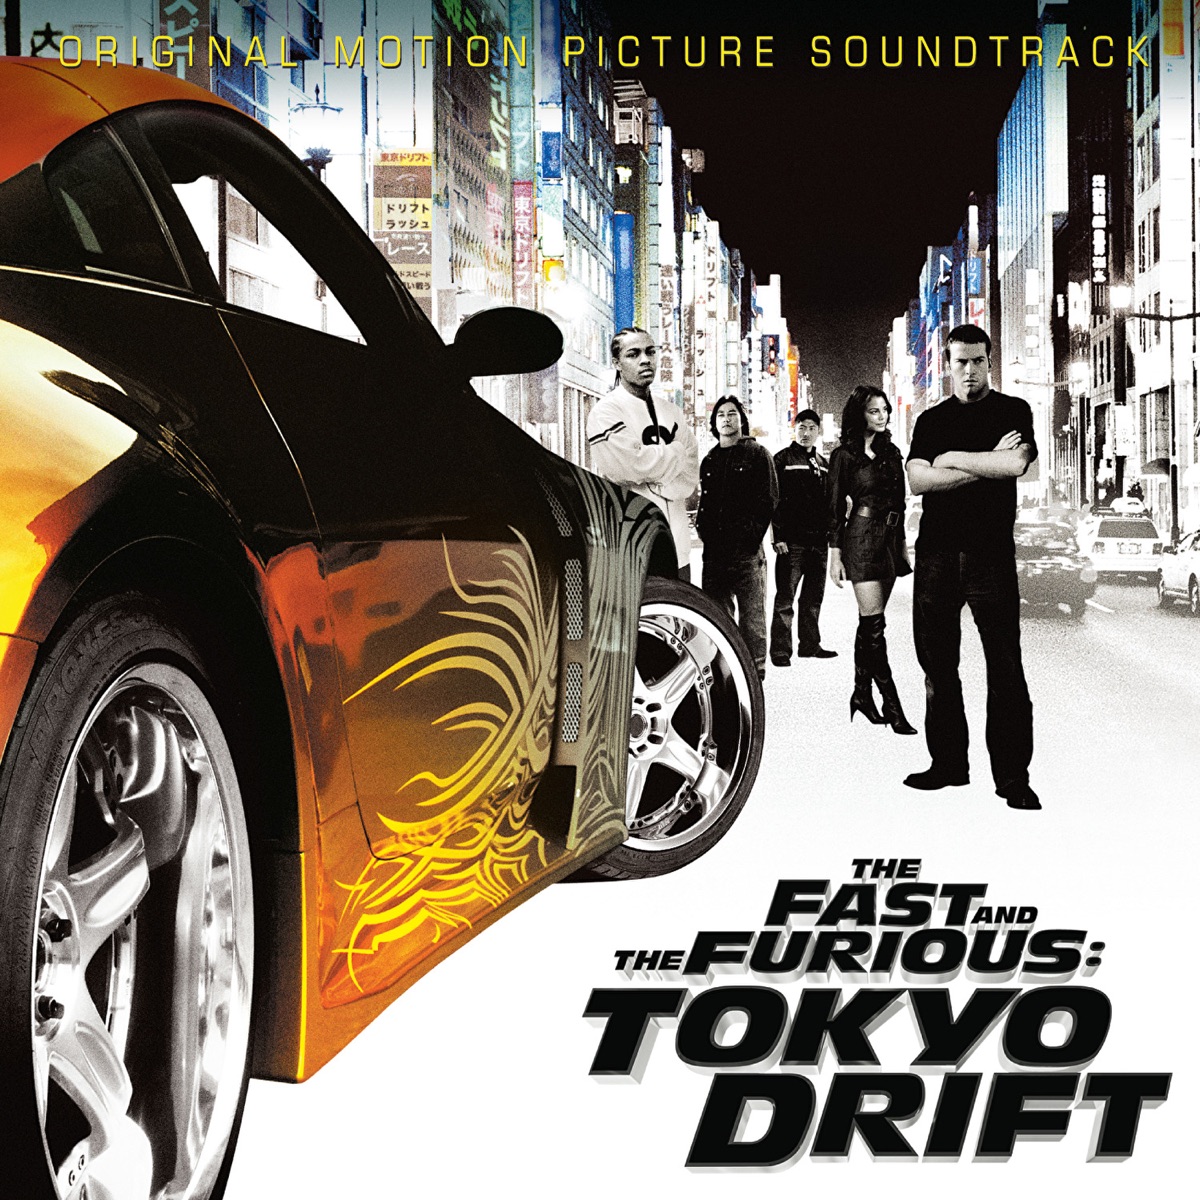 The Fast and the Furious: Tokyo Drift (Original Motion Picture Soundtrack)  - Album by Various Artists - Apple Music